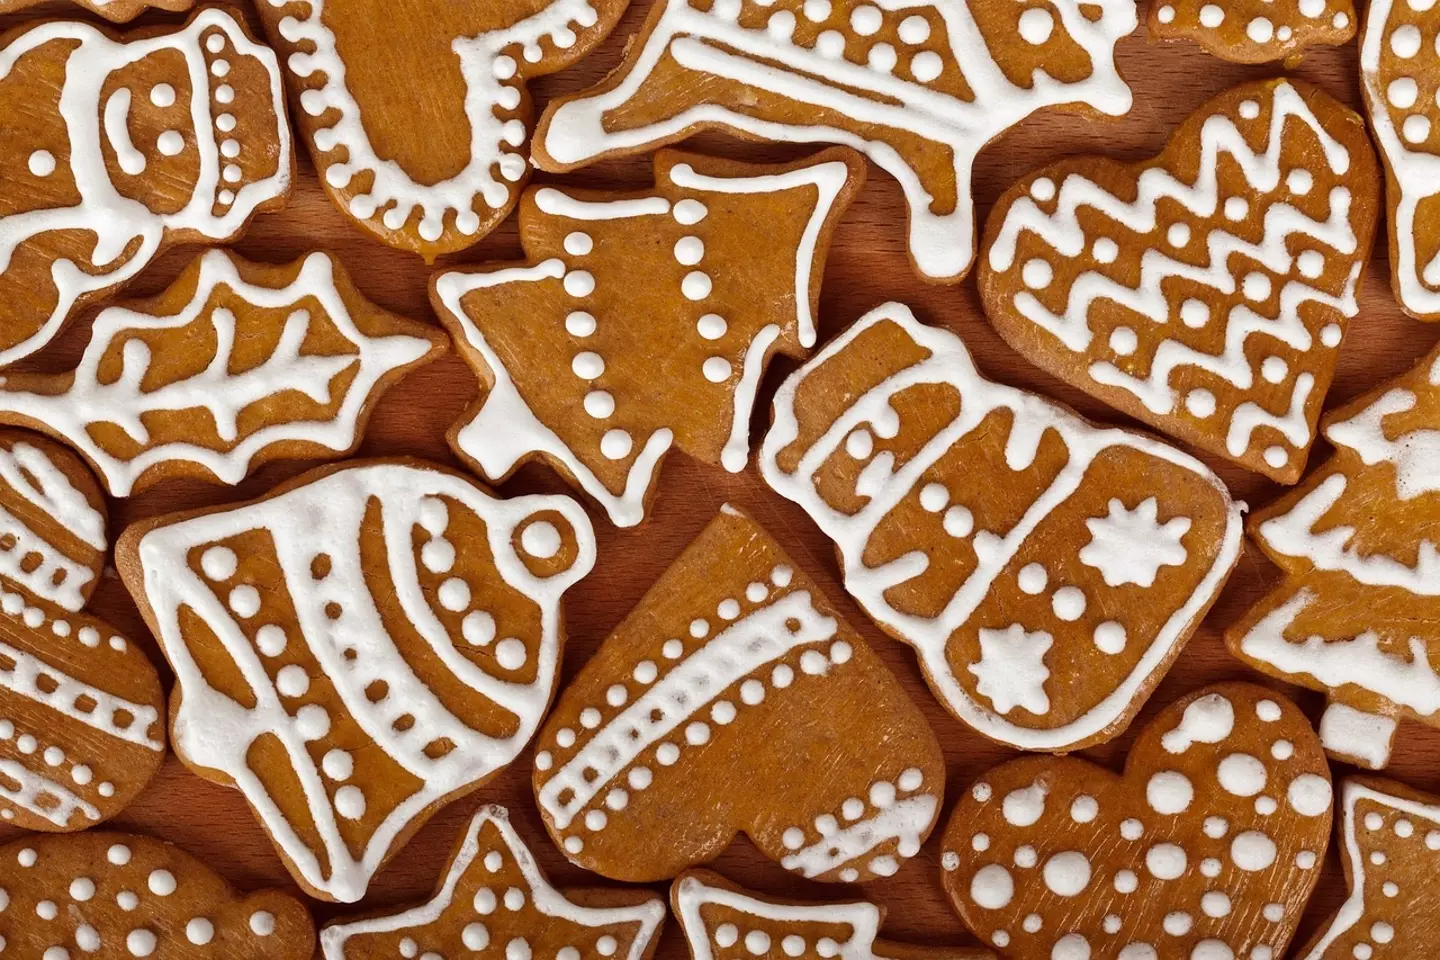 Gingerbread can be made into all sorts of shapes.